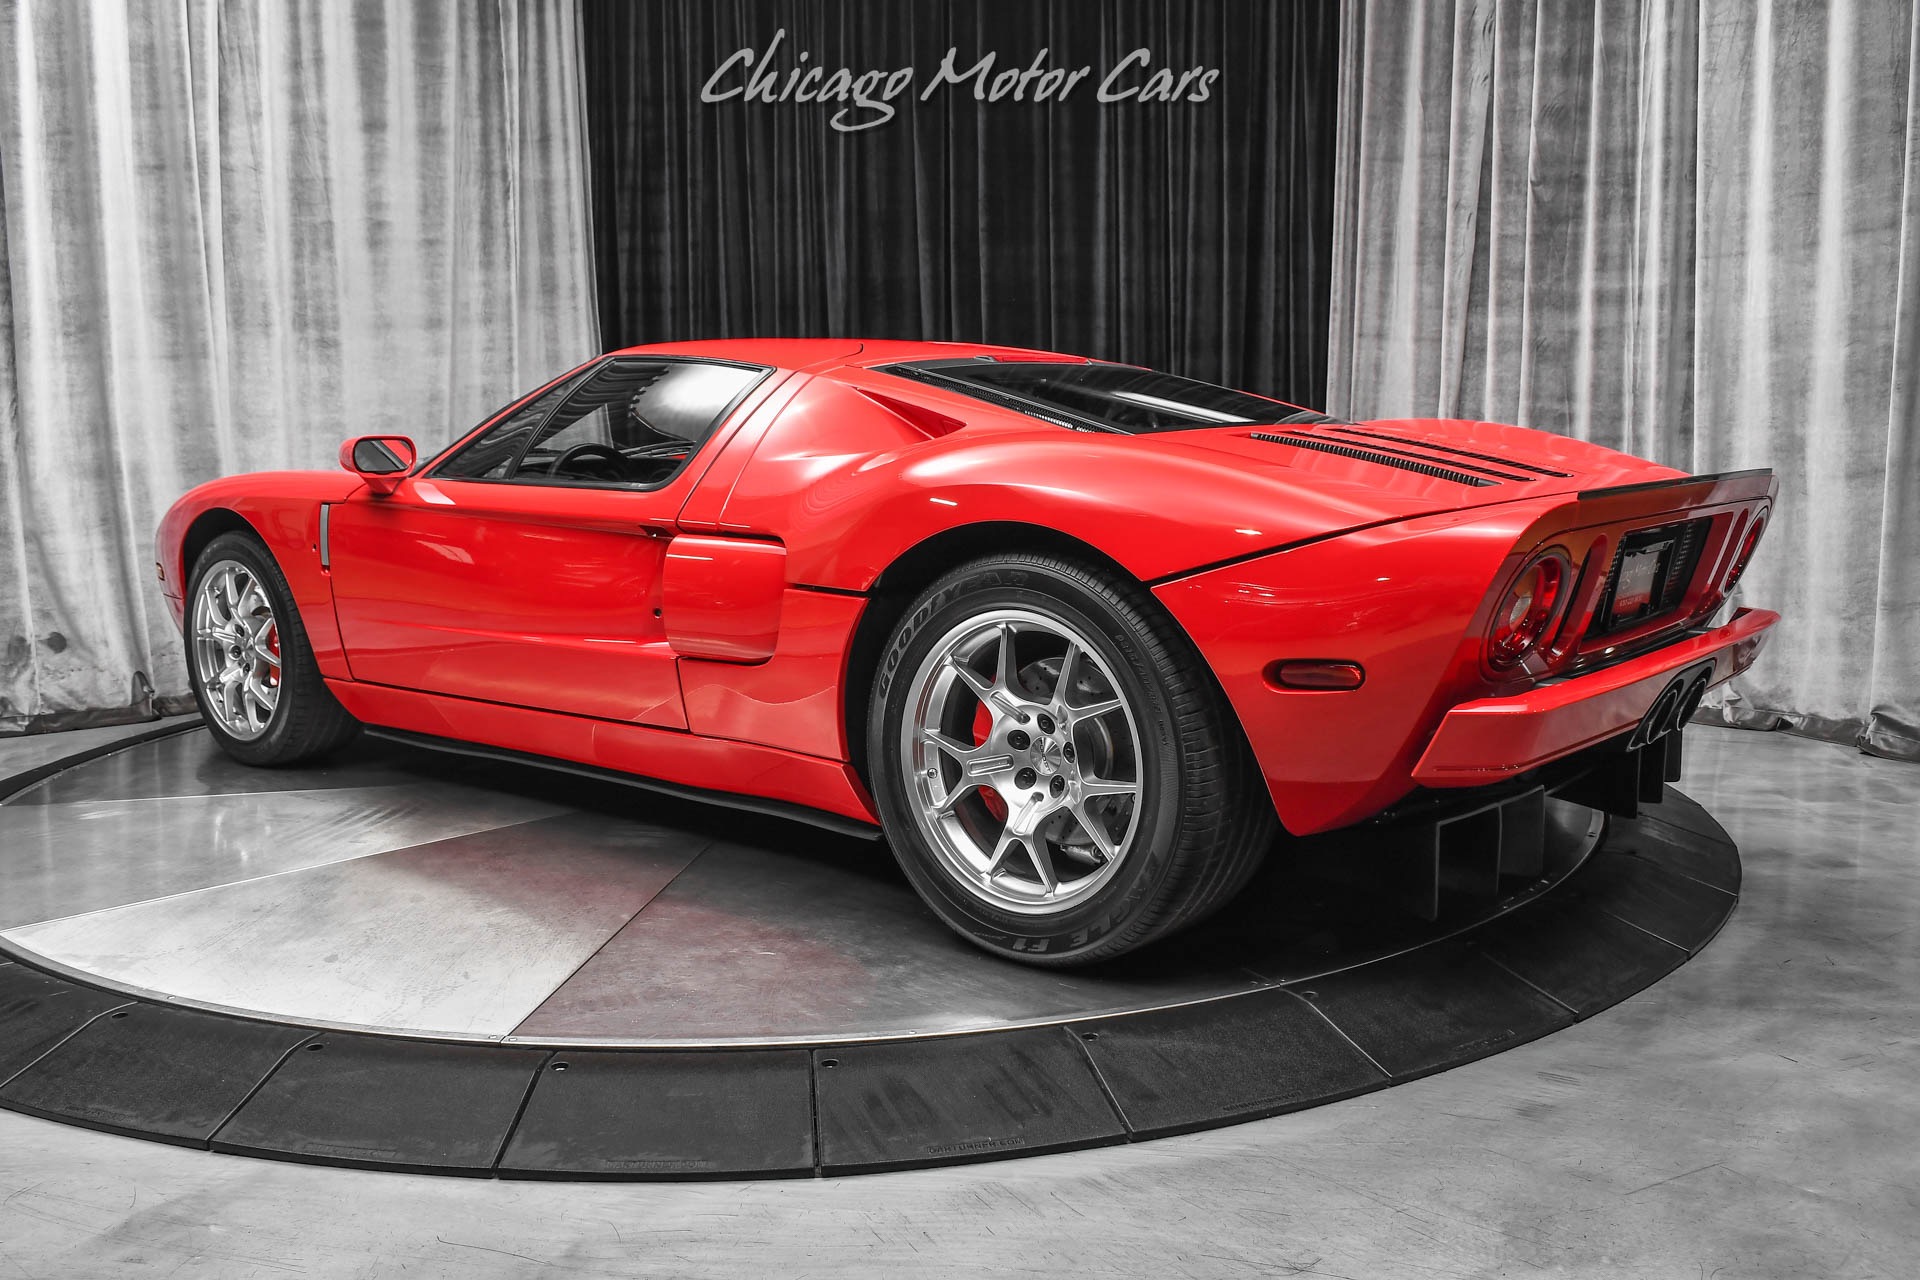 Used-2005-Ford-GT-Stripe-Delete-RARE-Serviced-Perfect-Collector-Quality